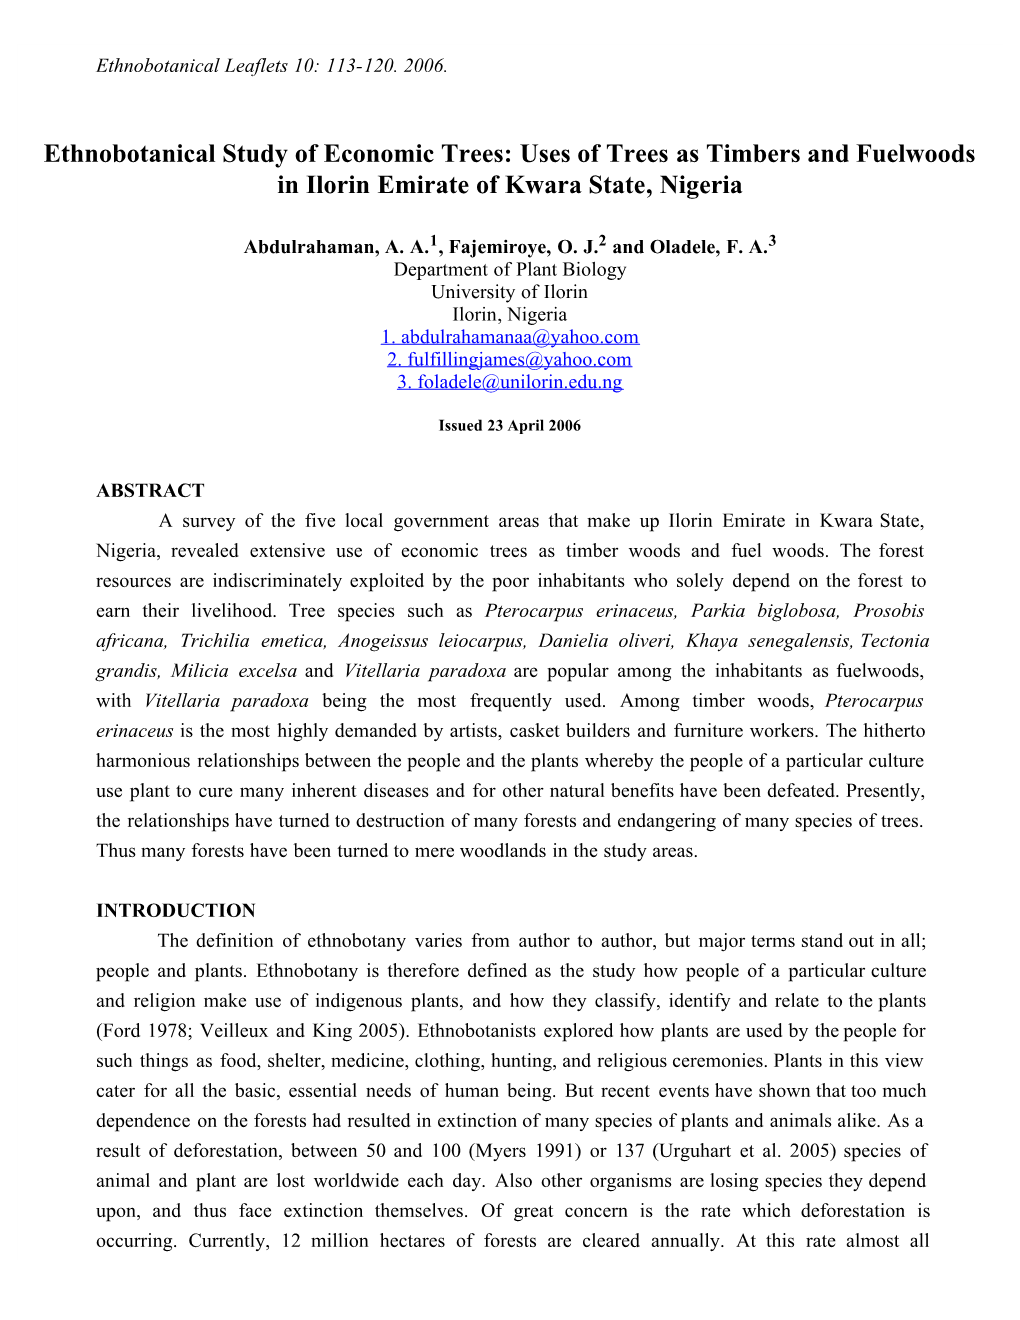 Ethnobotanical Study of Economic Trees: Uses of Trees As Timbers and Fuelwoods in Ilorin Emirate of Kwara State, Nigeria